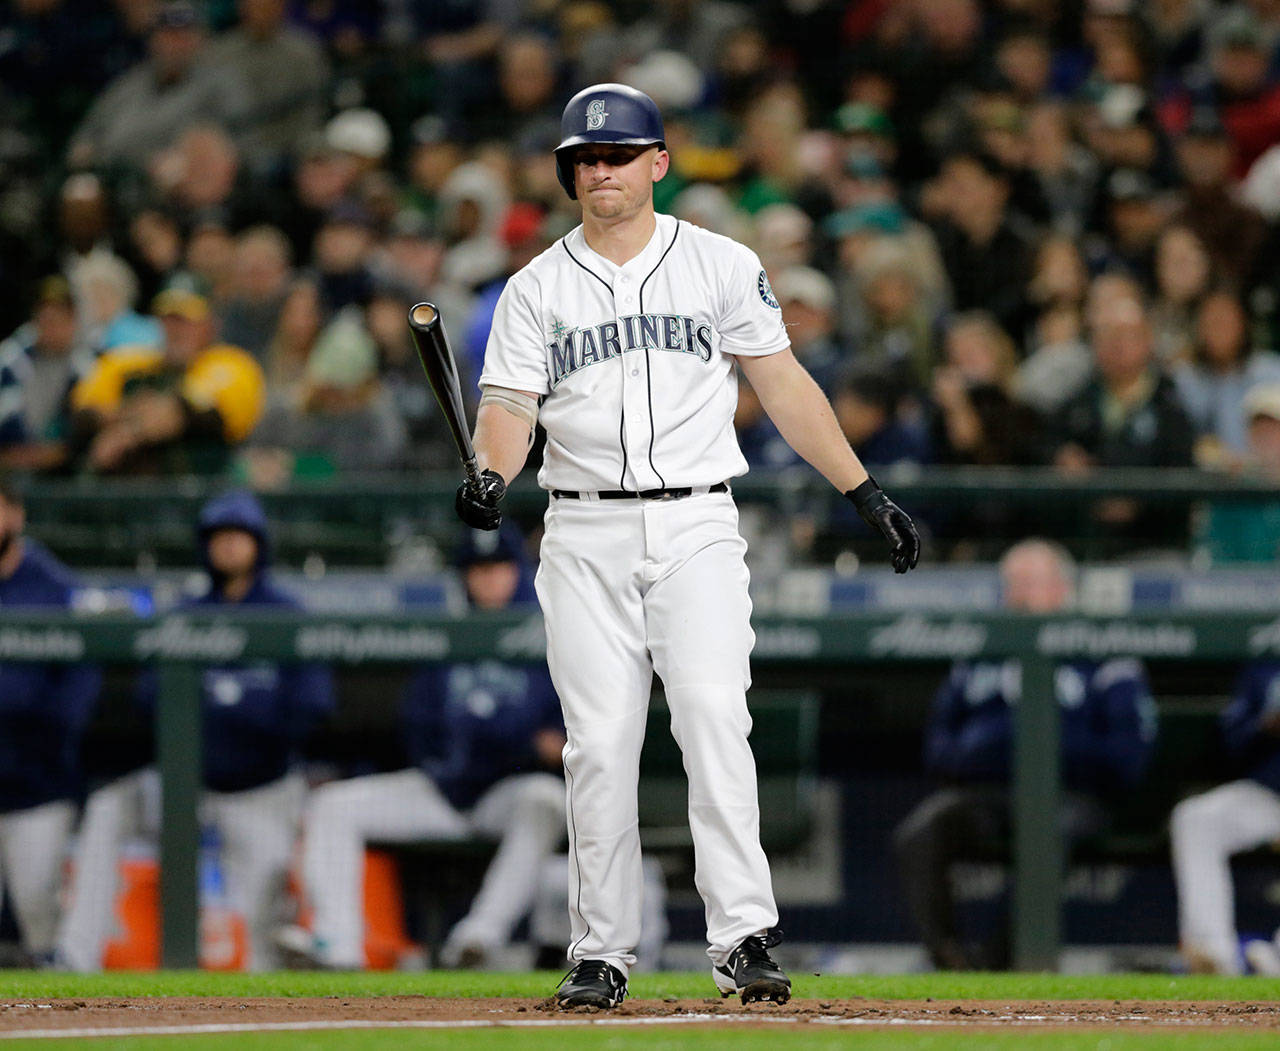 Seattle’s Kyle Seager tosses his bat after striking out during a Sept. 24 game at Safeco Field. (AP Photo/John Froschauer)